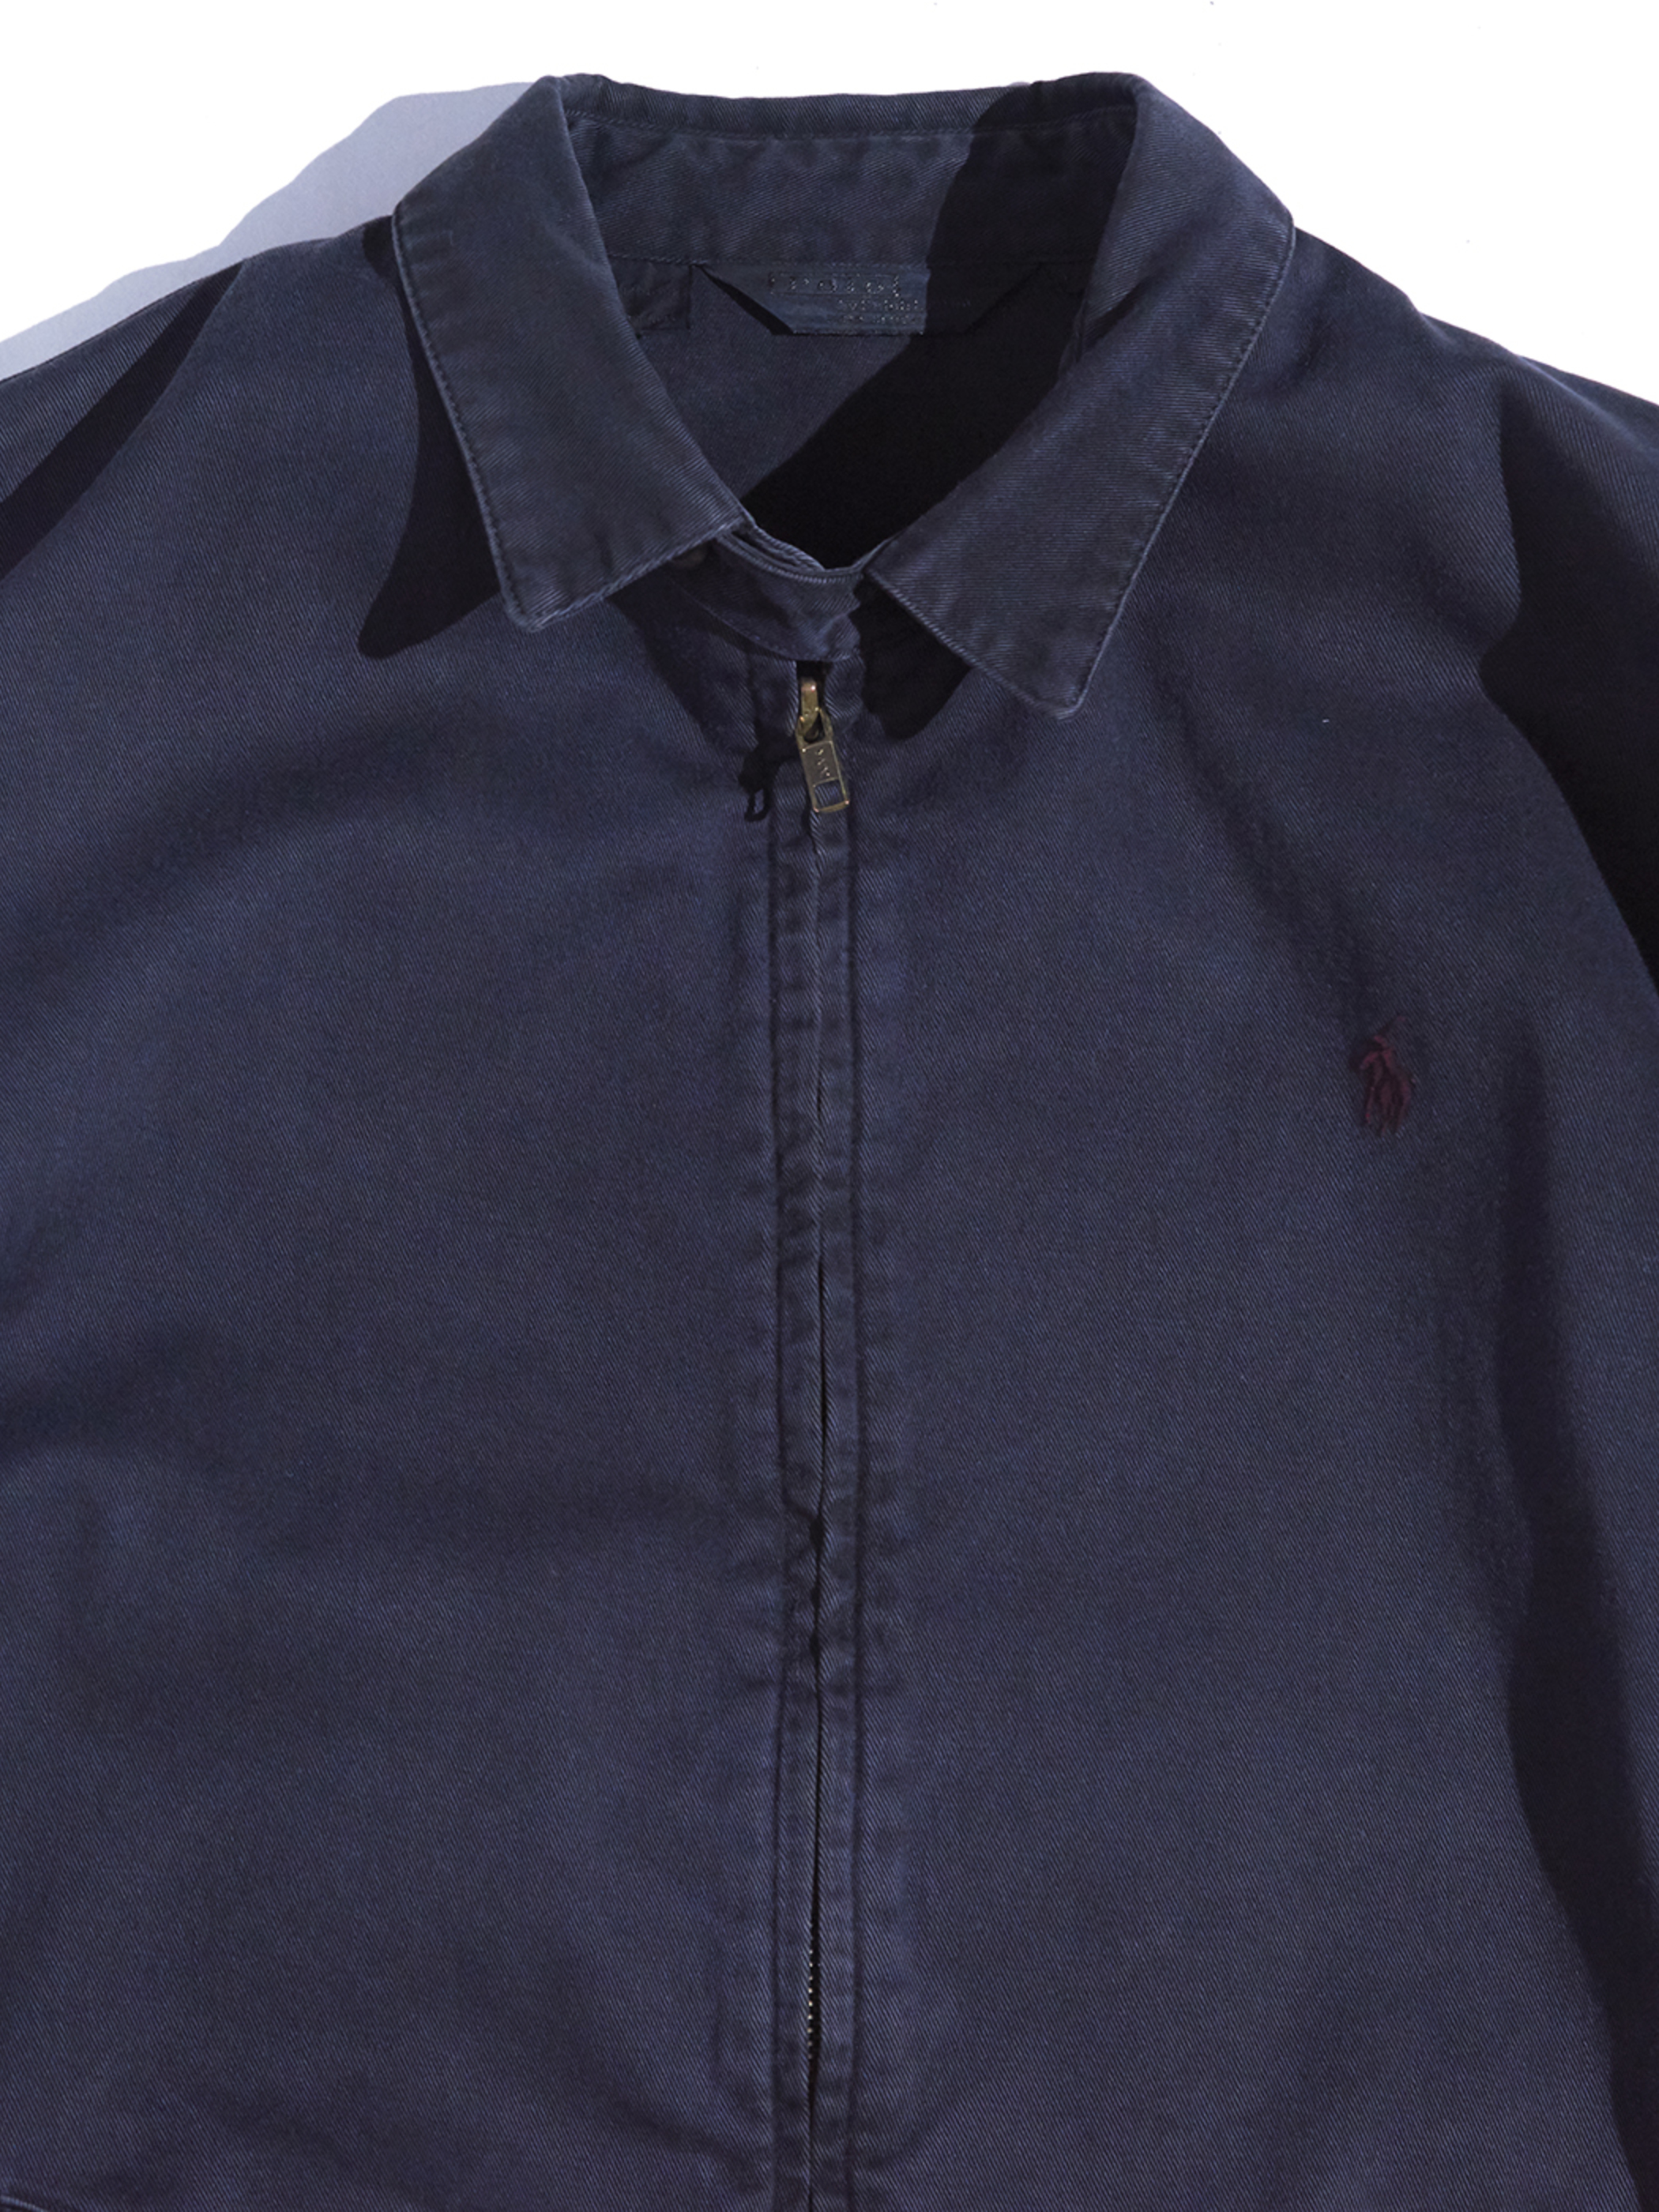 1980s "Polo by Ralph Lauren" pigment dyed drizzler jacket -PIGMENT DYED BLACK-